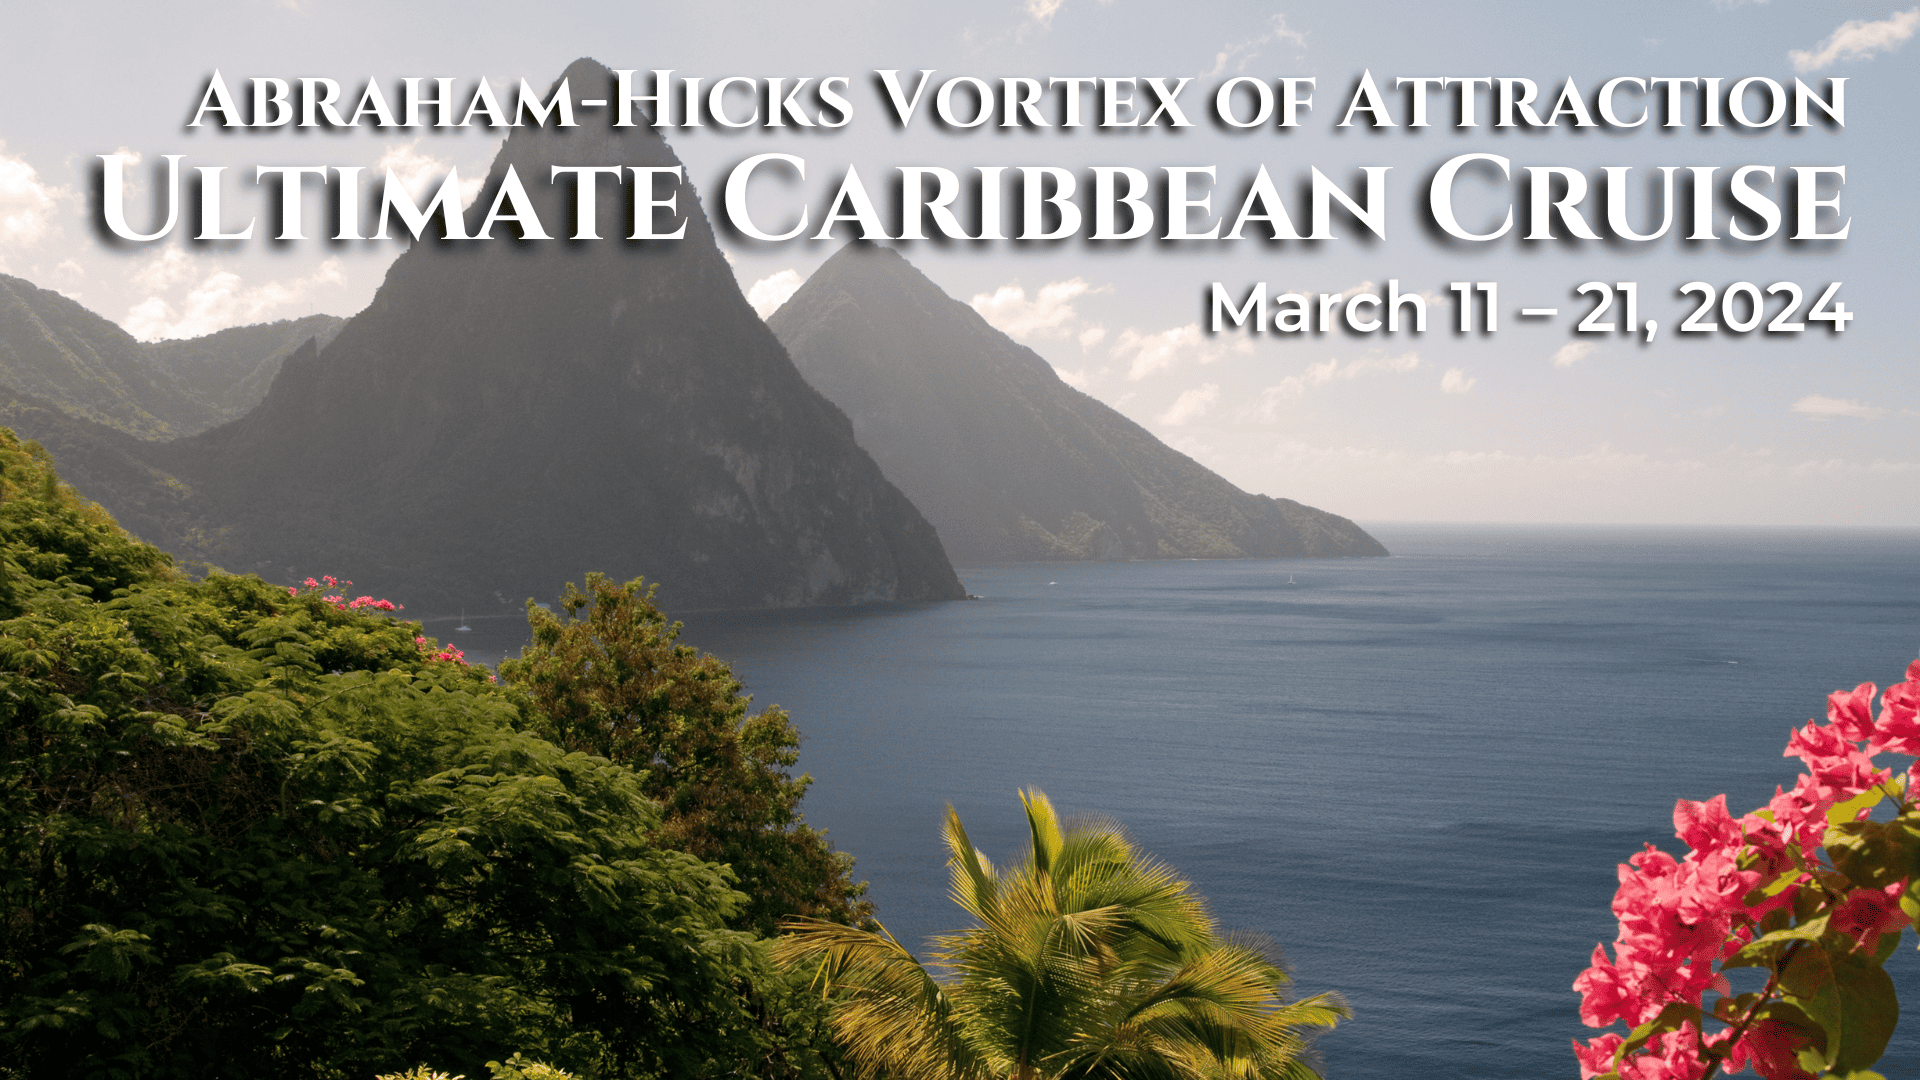 March 11 21, 2024 Ultimate Caribbean Cruise Home of AbrahamHicks